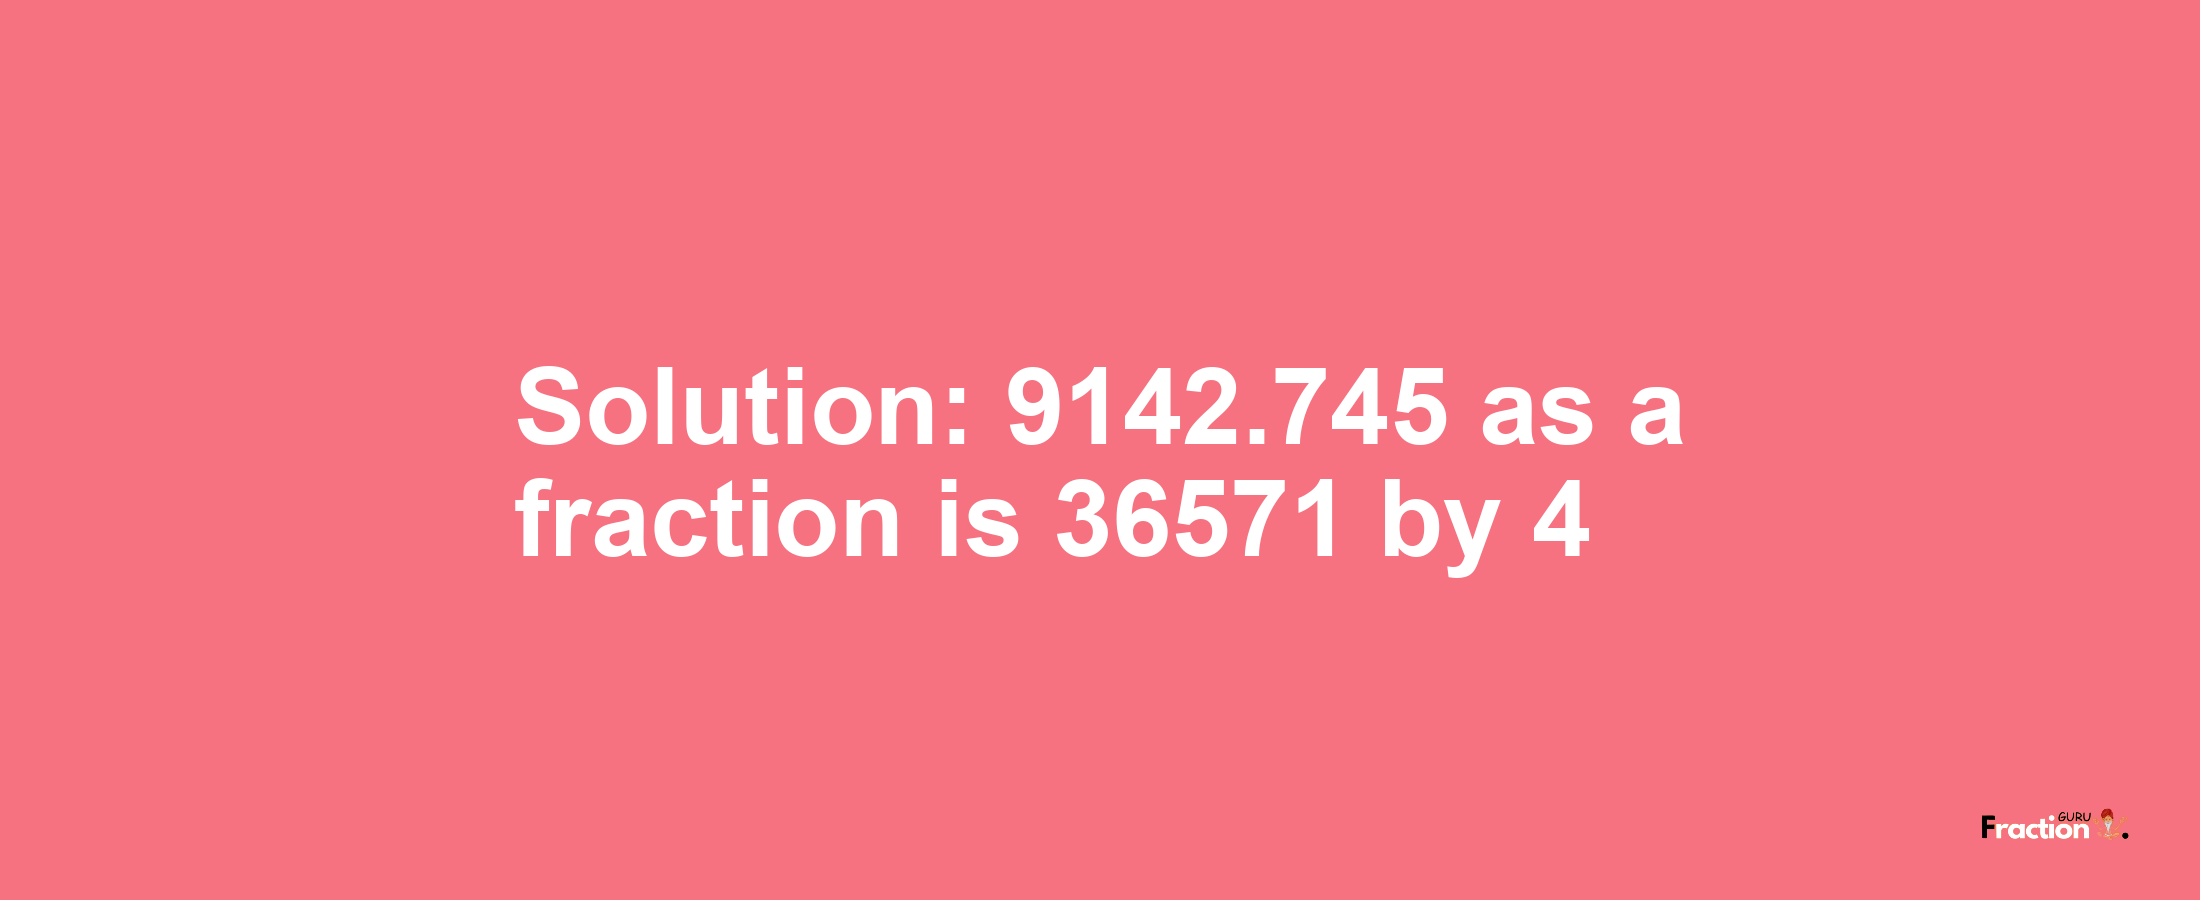 Solution:9142.745 as a fraction is 36571/4